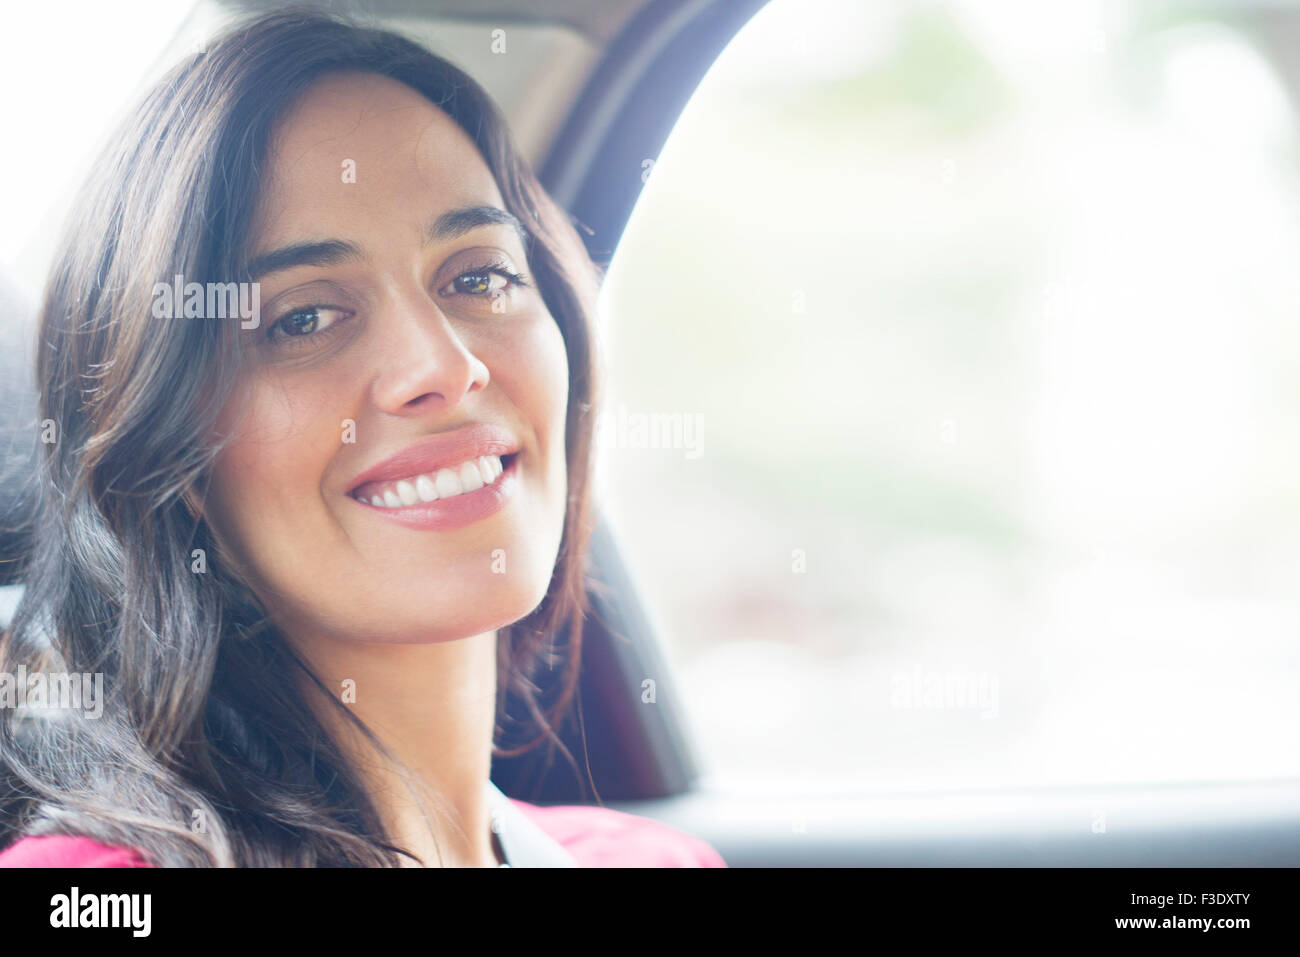 Woman smiling in car, portrait Stock Photo